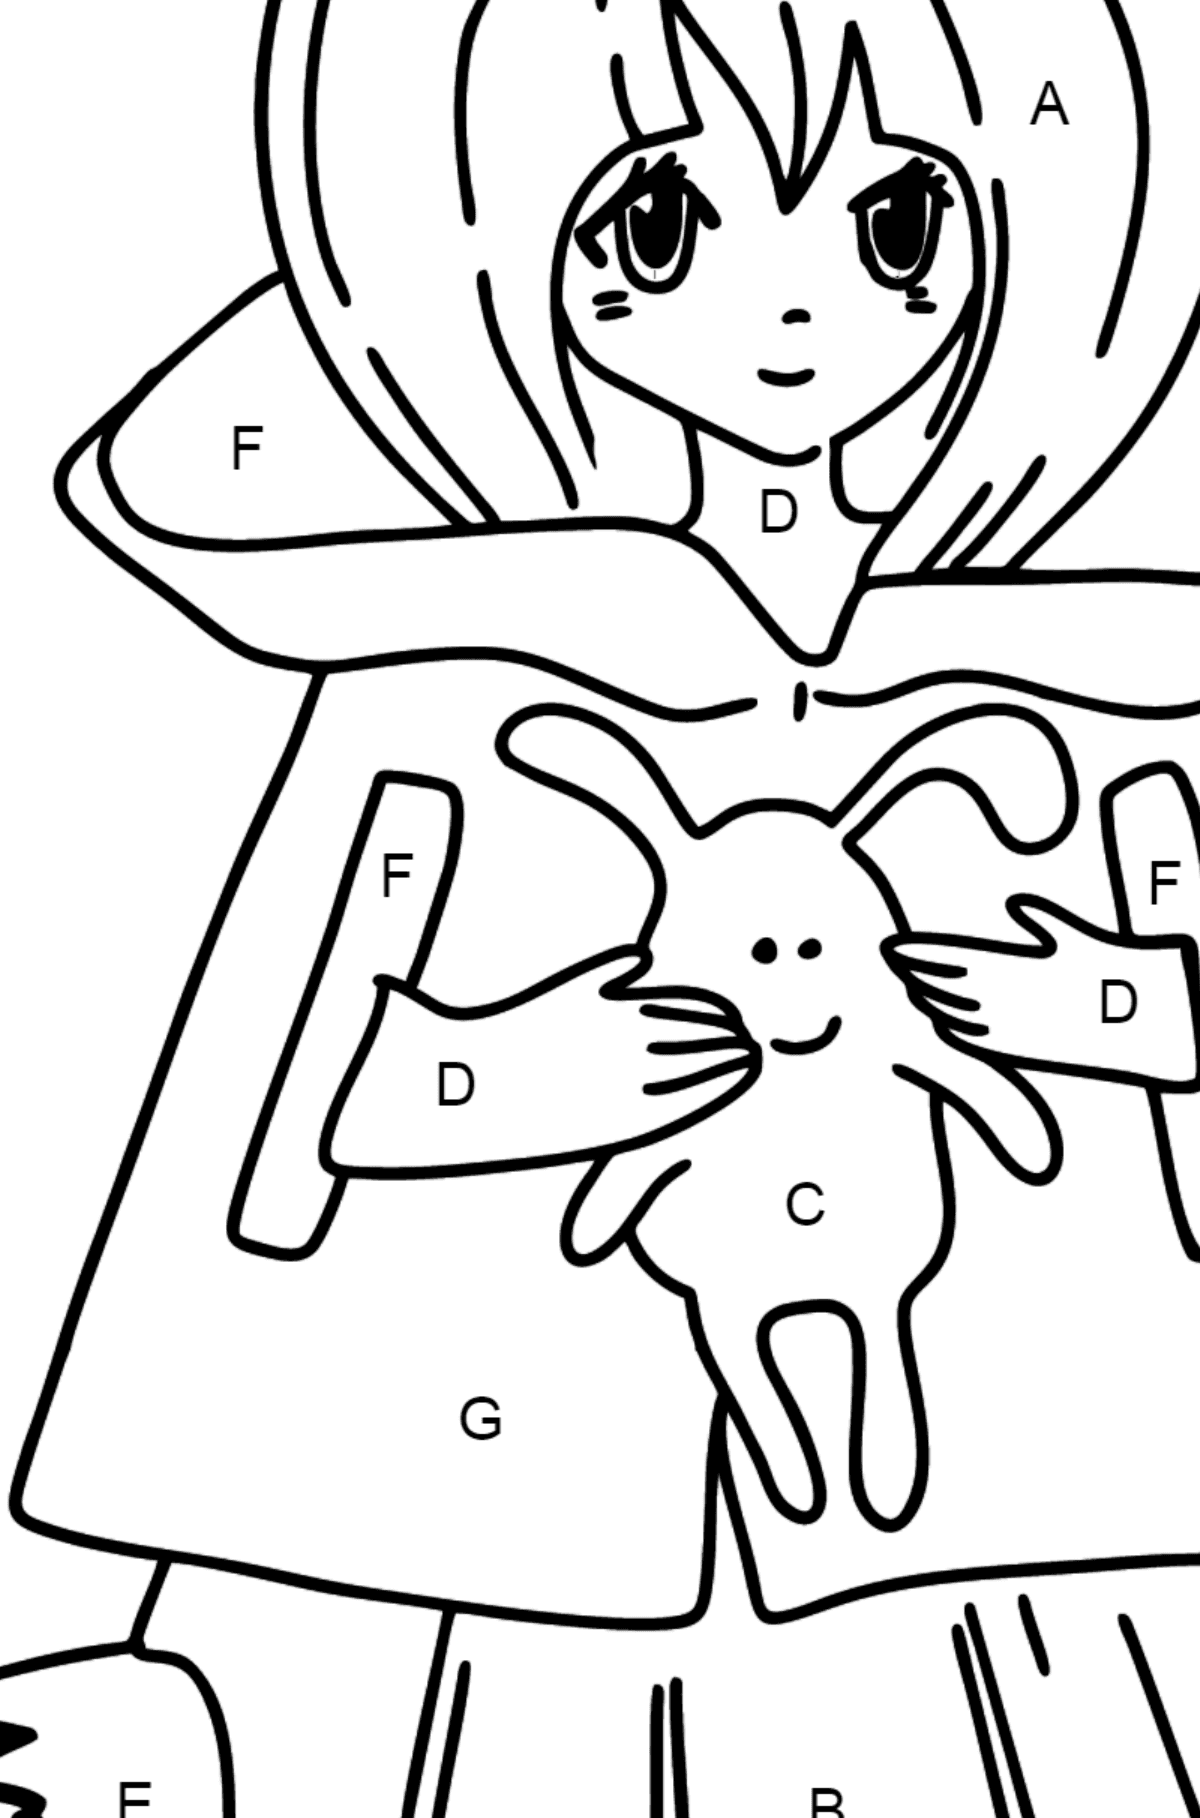 Anime Girl with Tail coloring page - Coloring by Letters for Kids